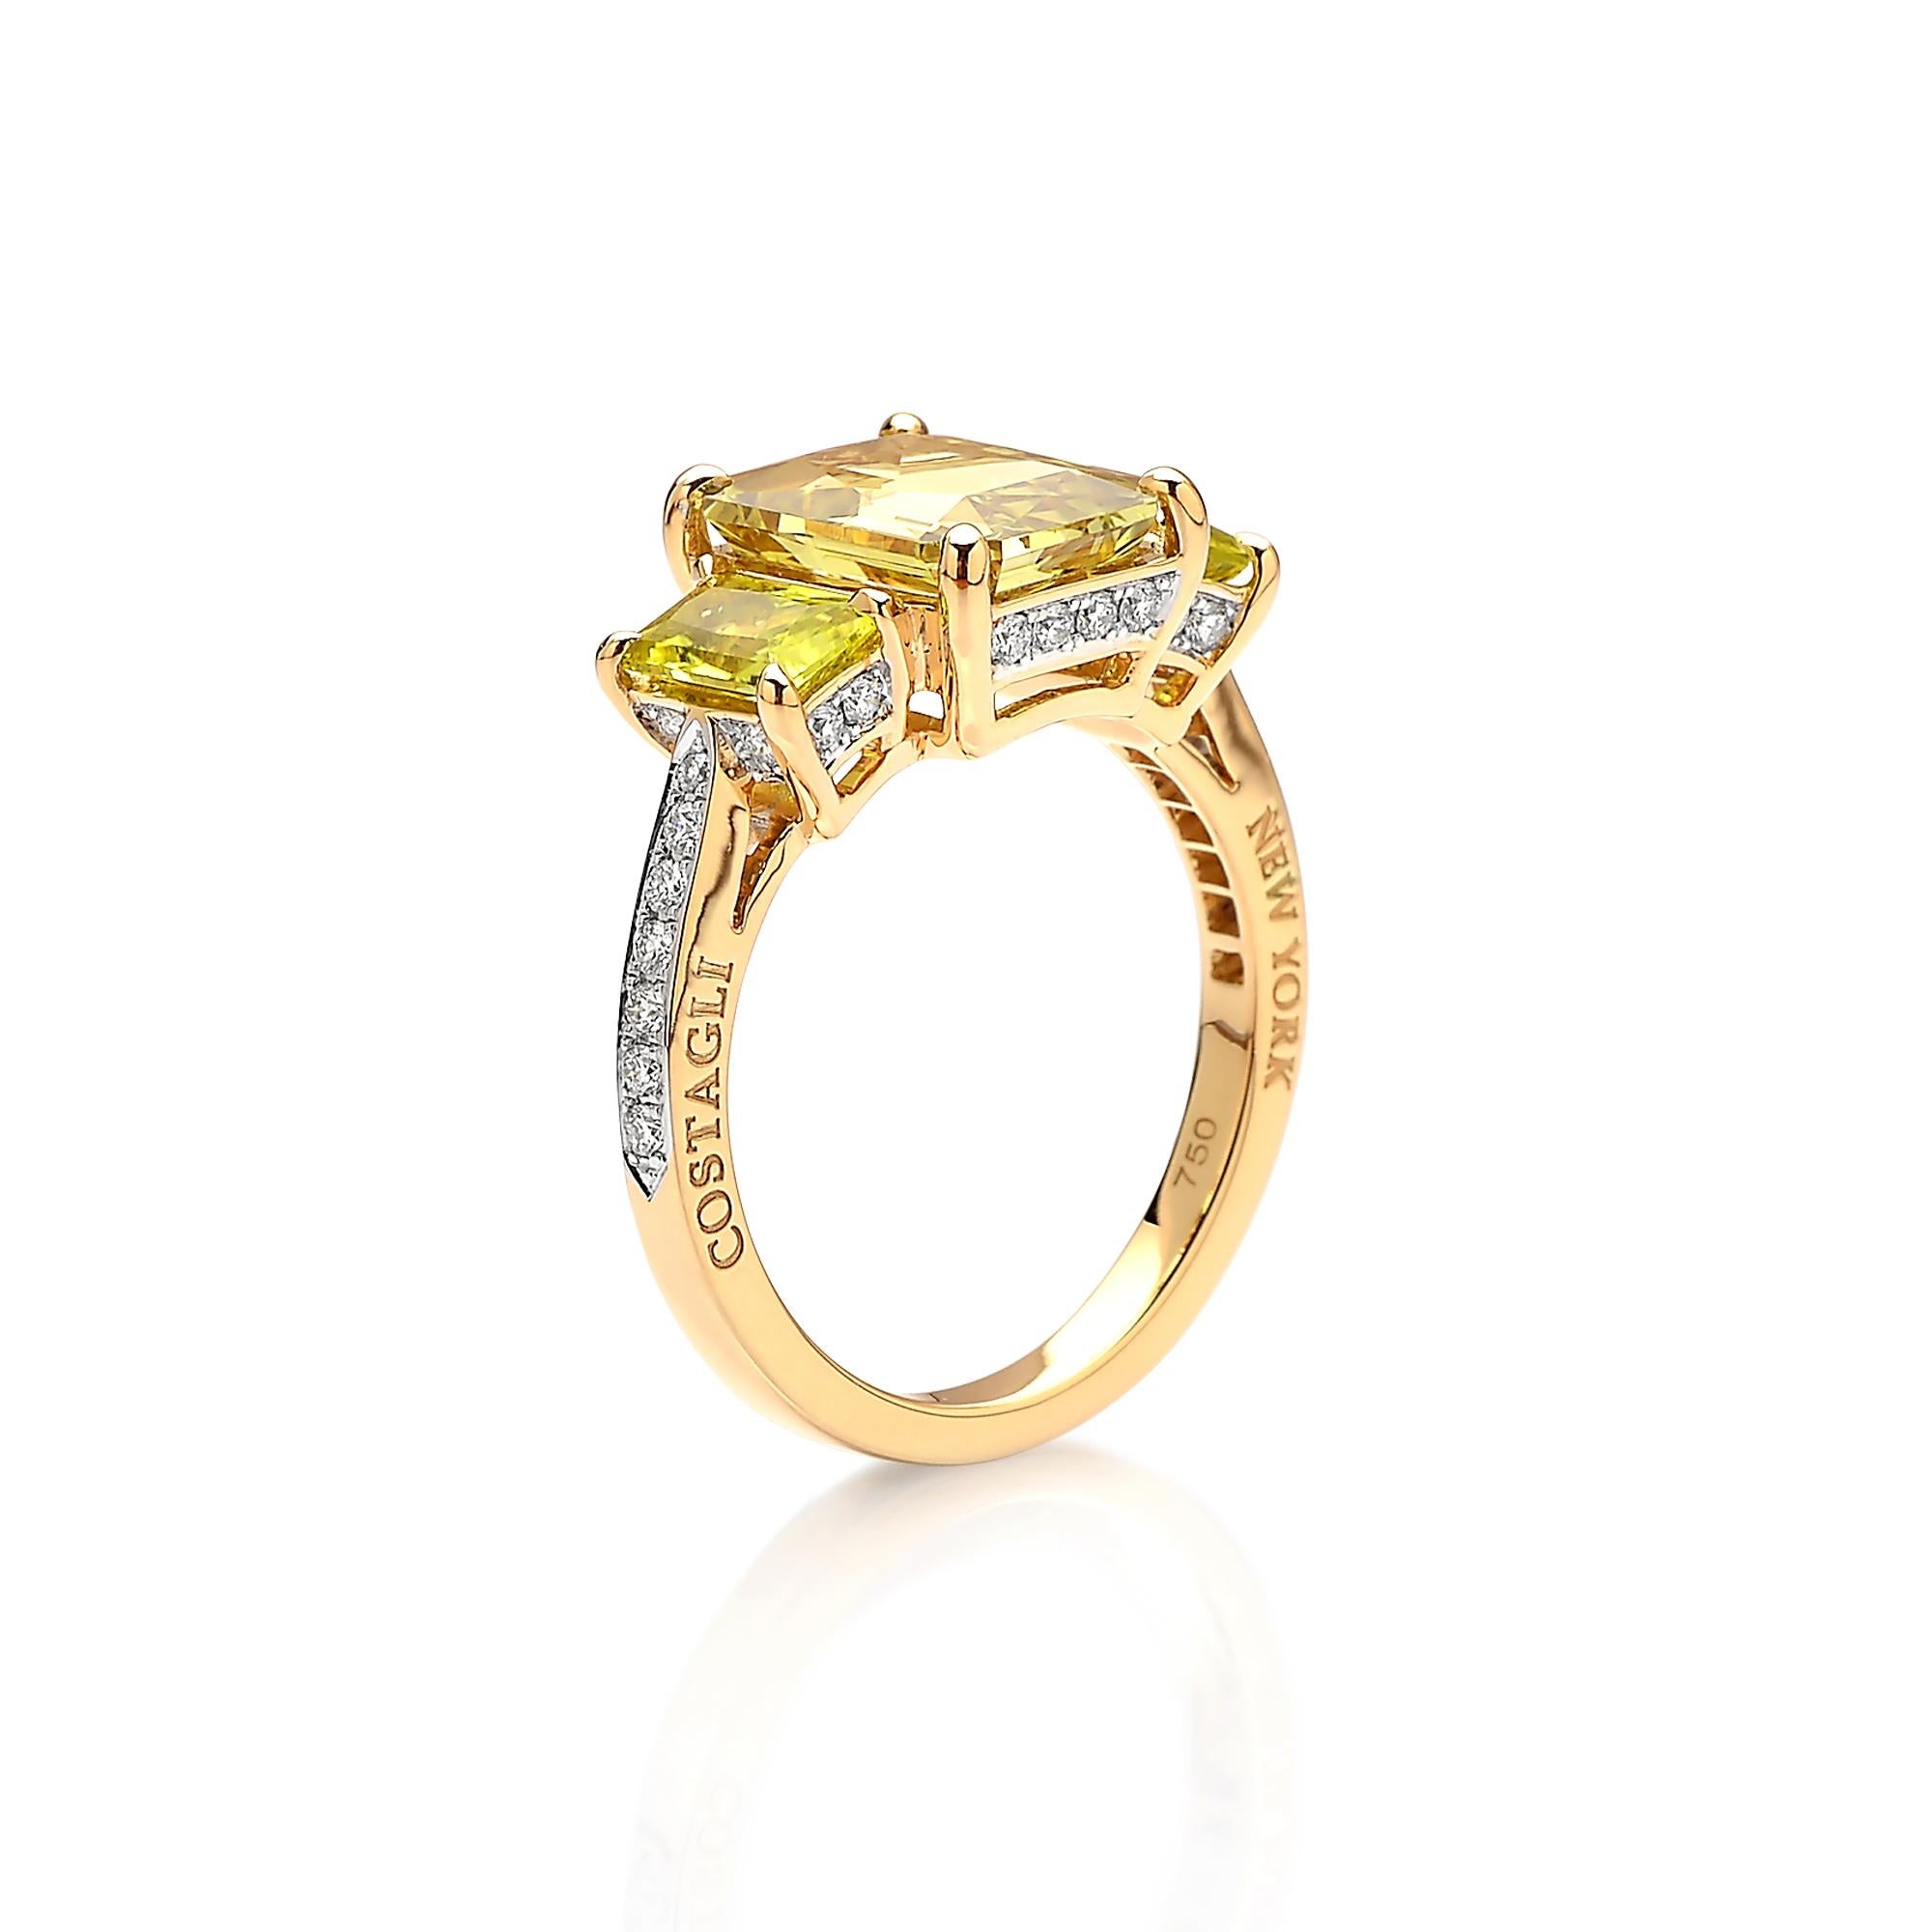 Emerald-cut Chrysoberyl ring flanked by yellow tourmaline side stones set in 18kt yellow gold with pave-set round, brilliant diamonds.

The clean lines of the cutting techniques and the exquisite pairing of the bright colored gemstones make this one